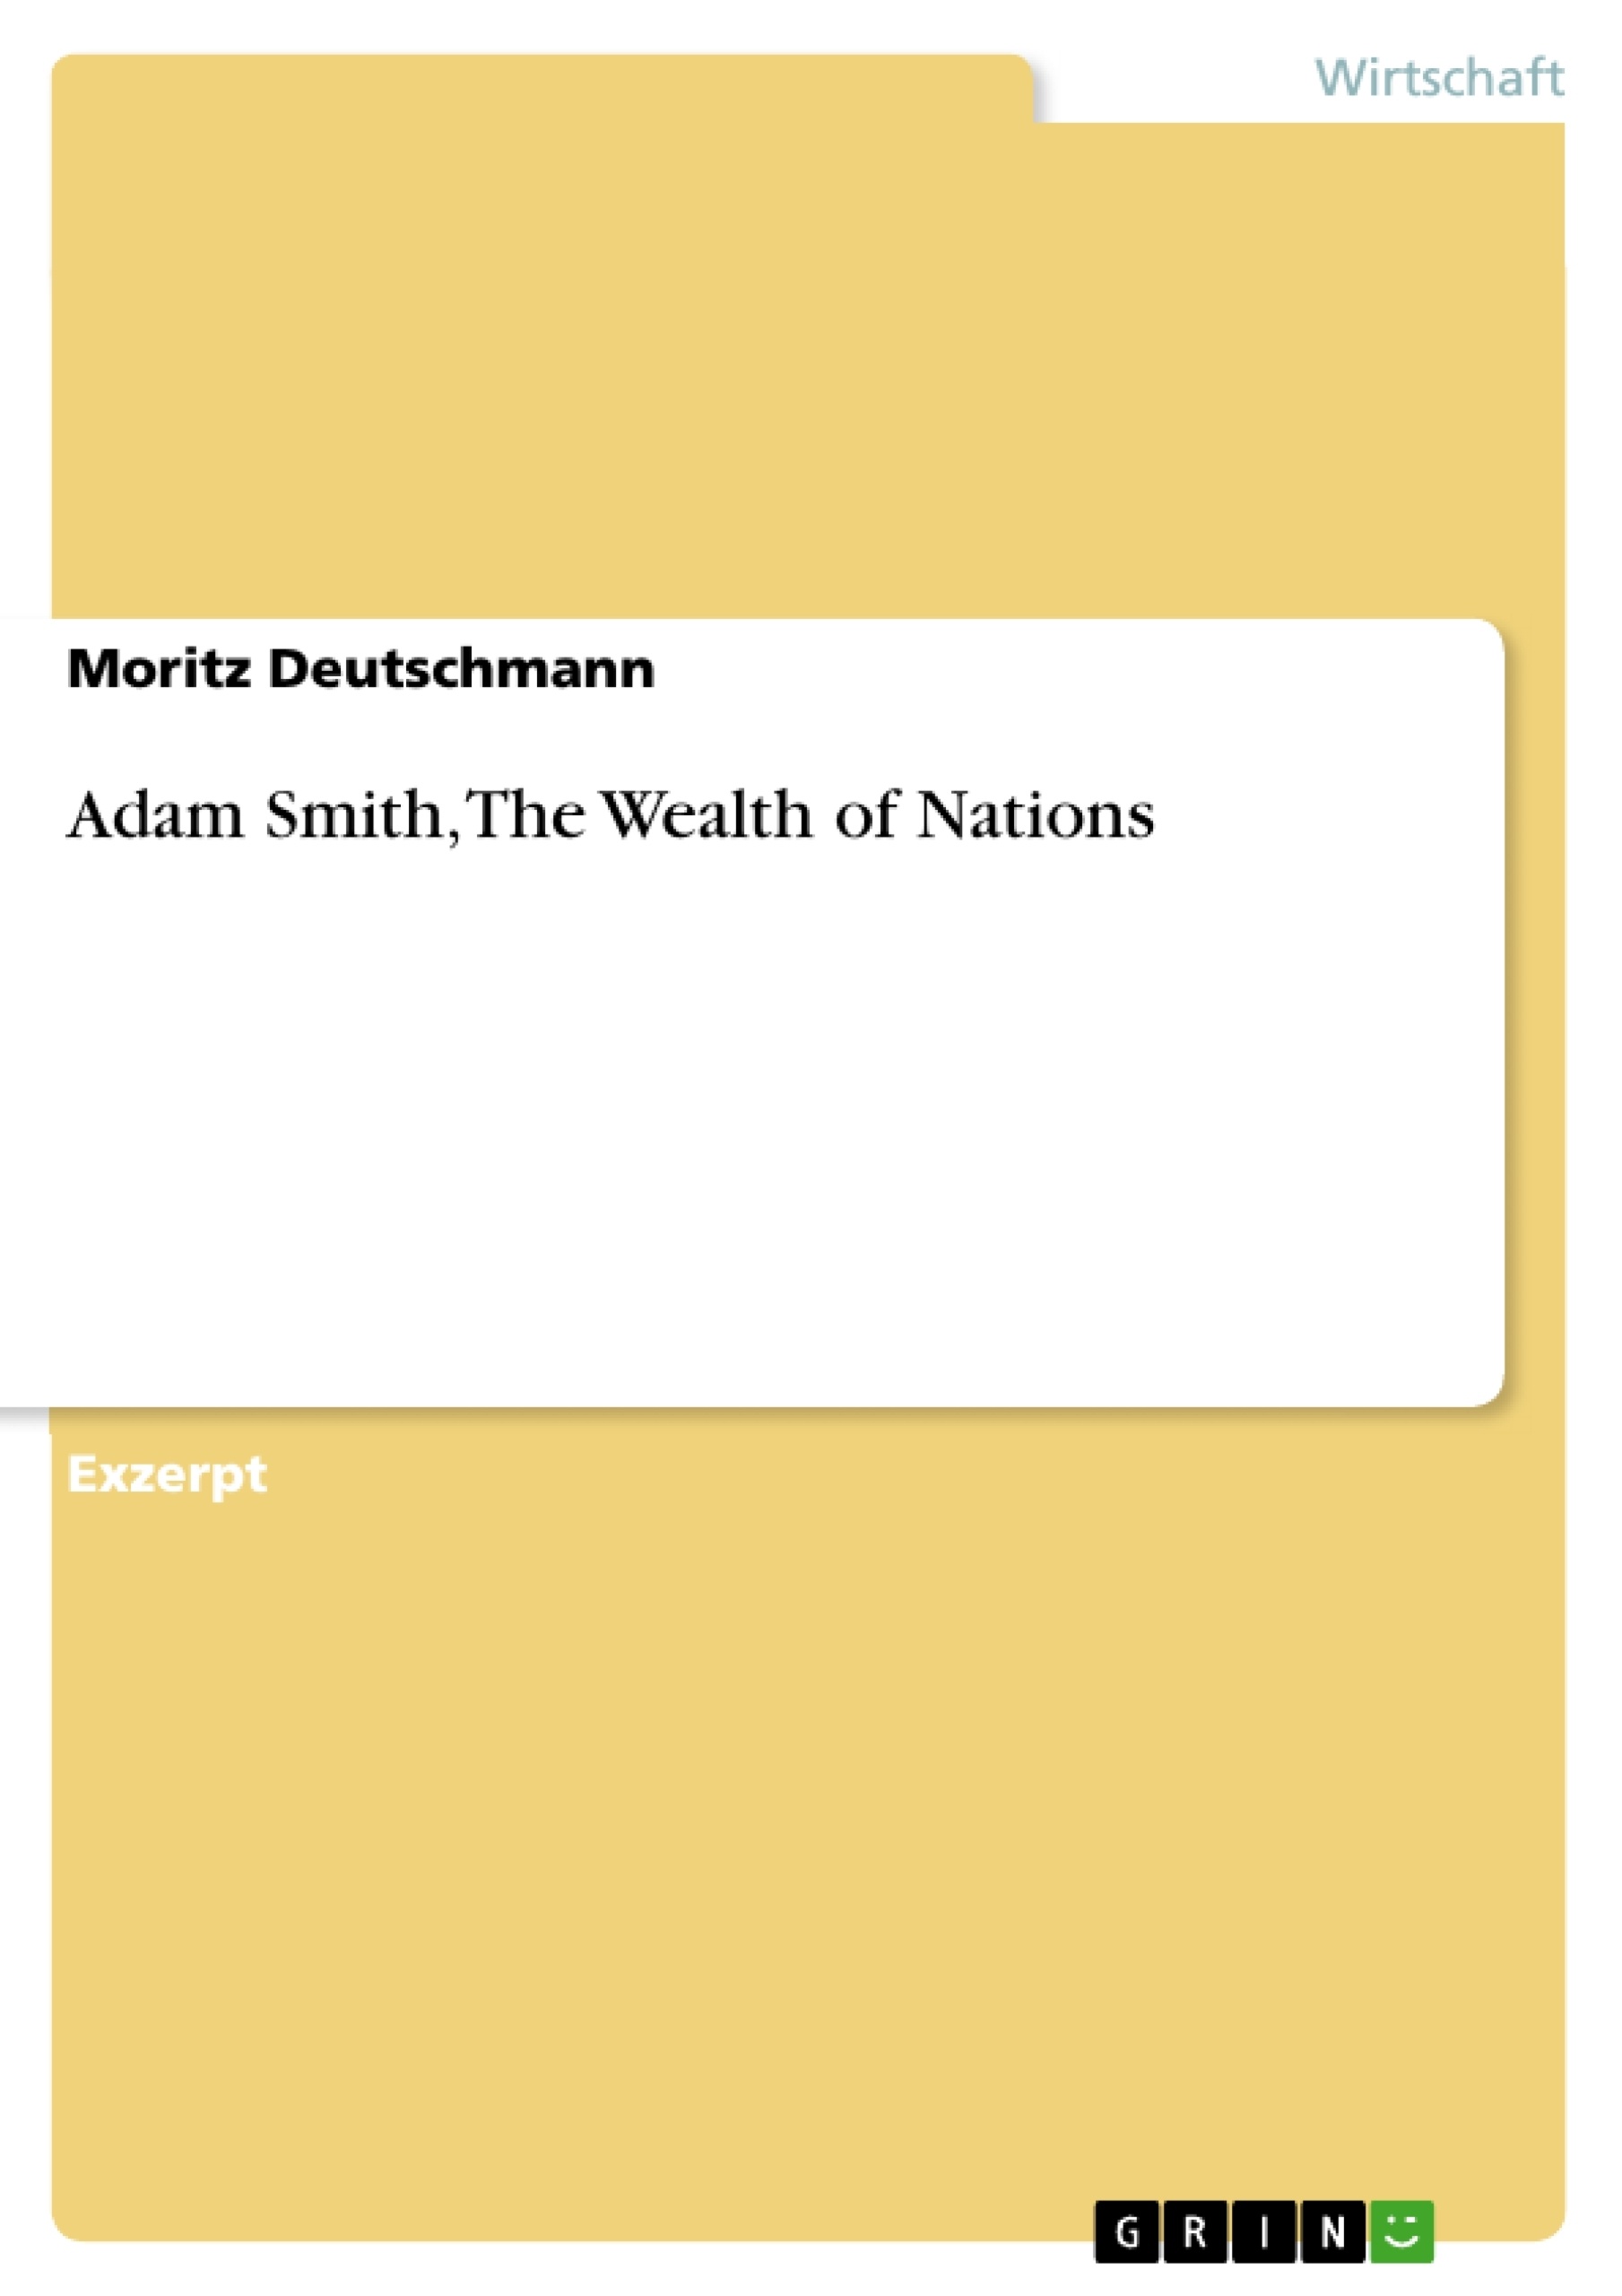 Titel: Adam Smith, The Wealth of Nations